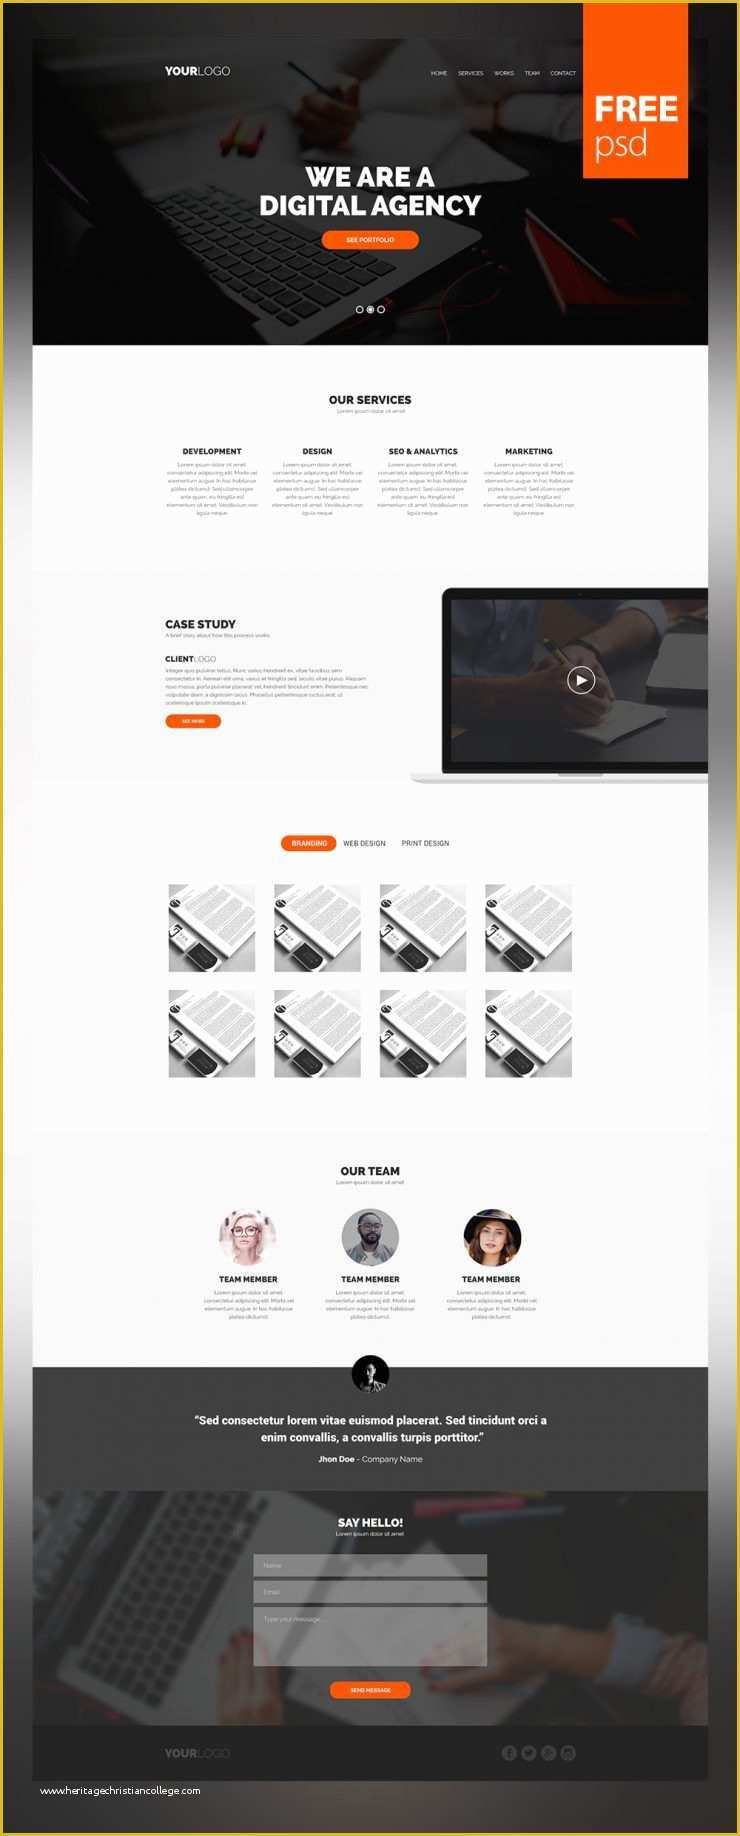 Basic Website Templates Free Download Of Simple and Clean Website Template Psd for Creative Digital